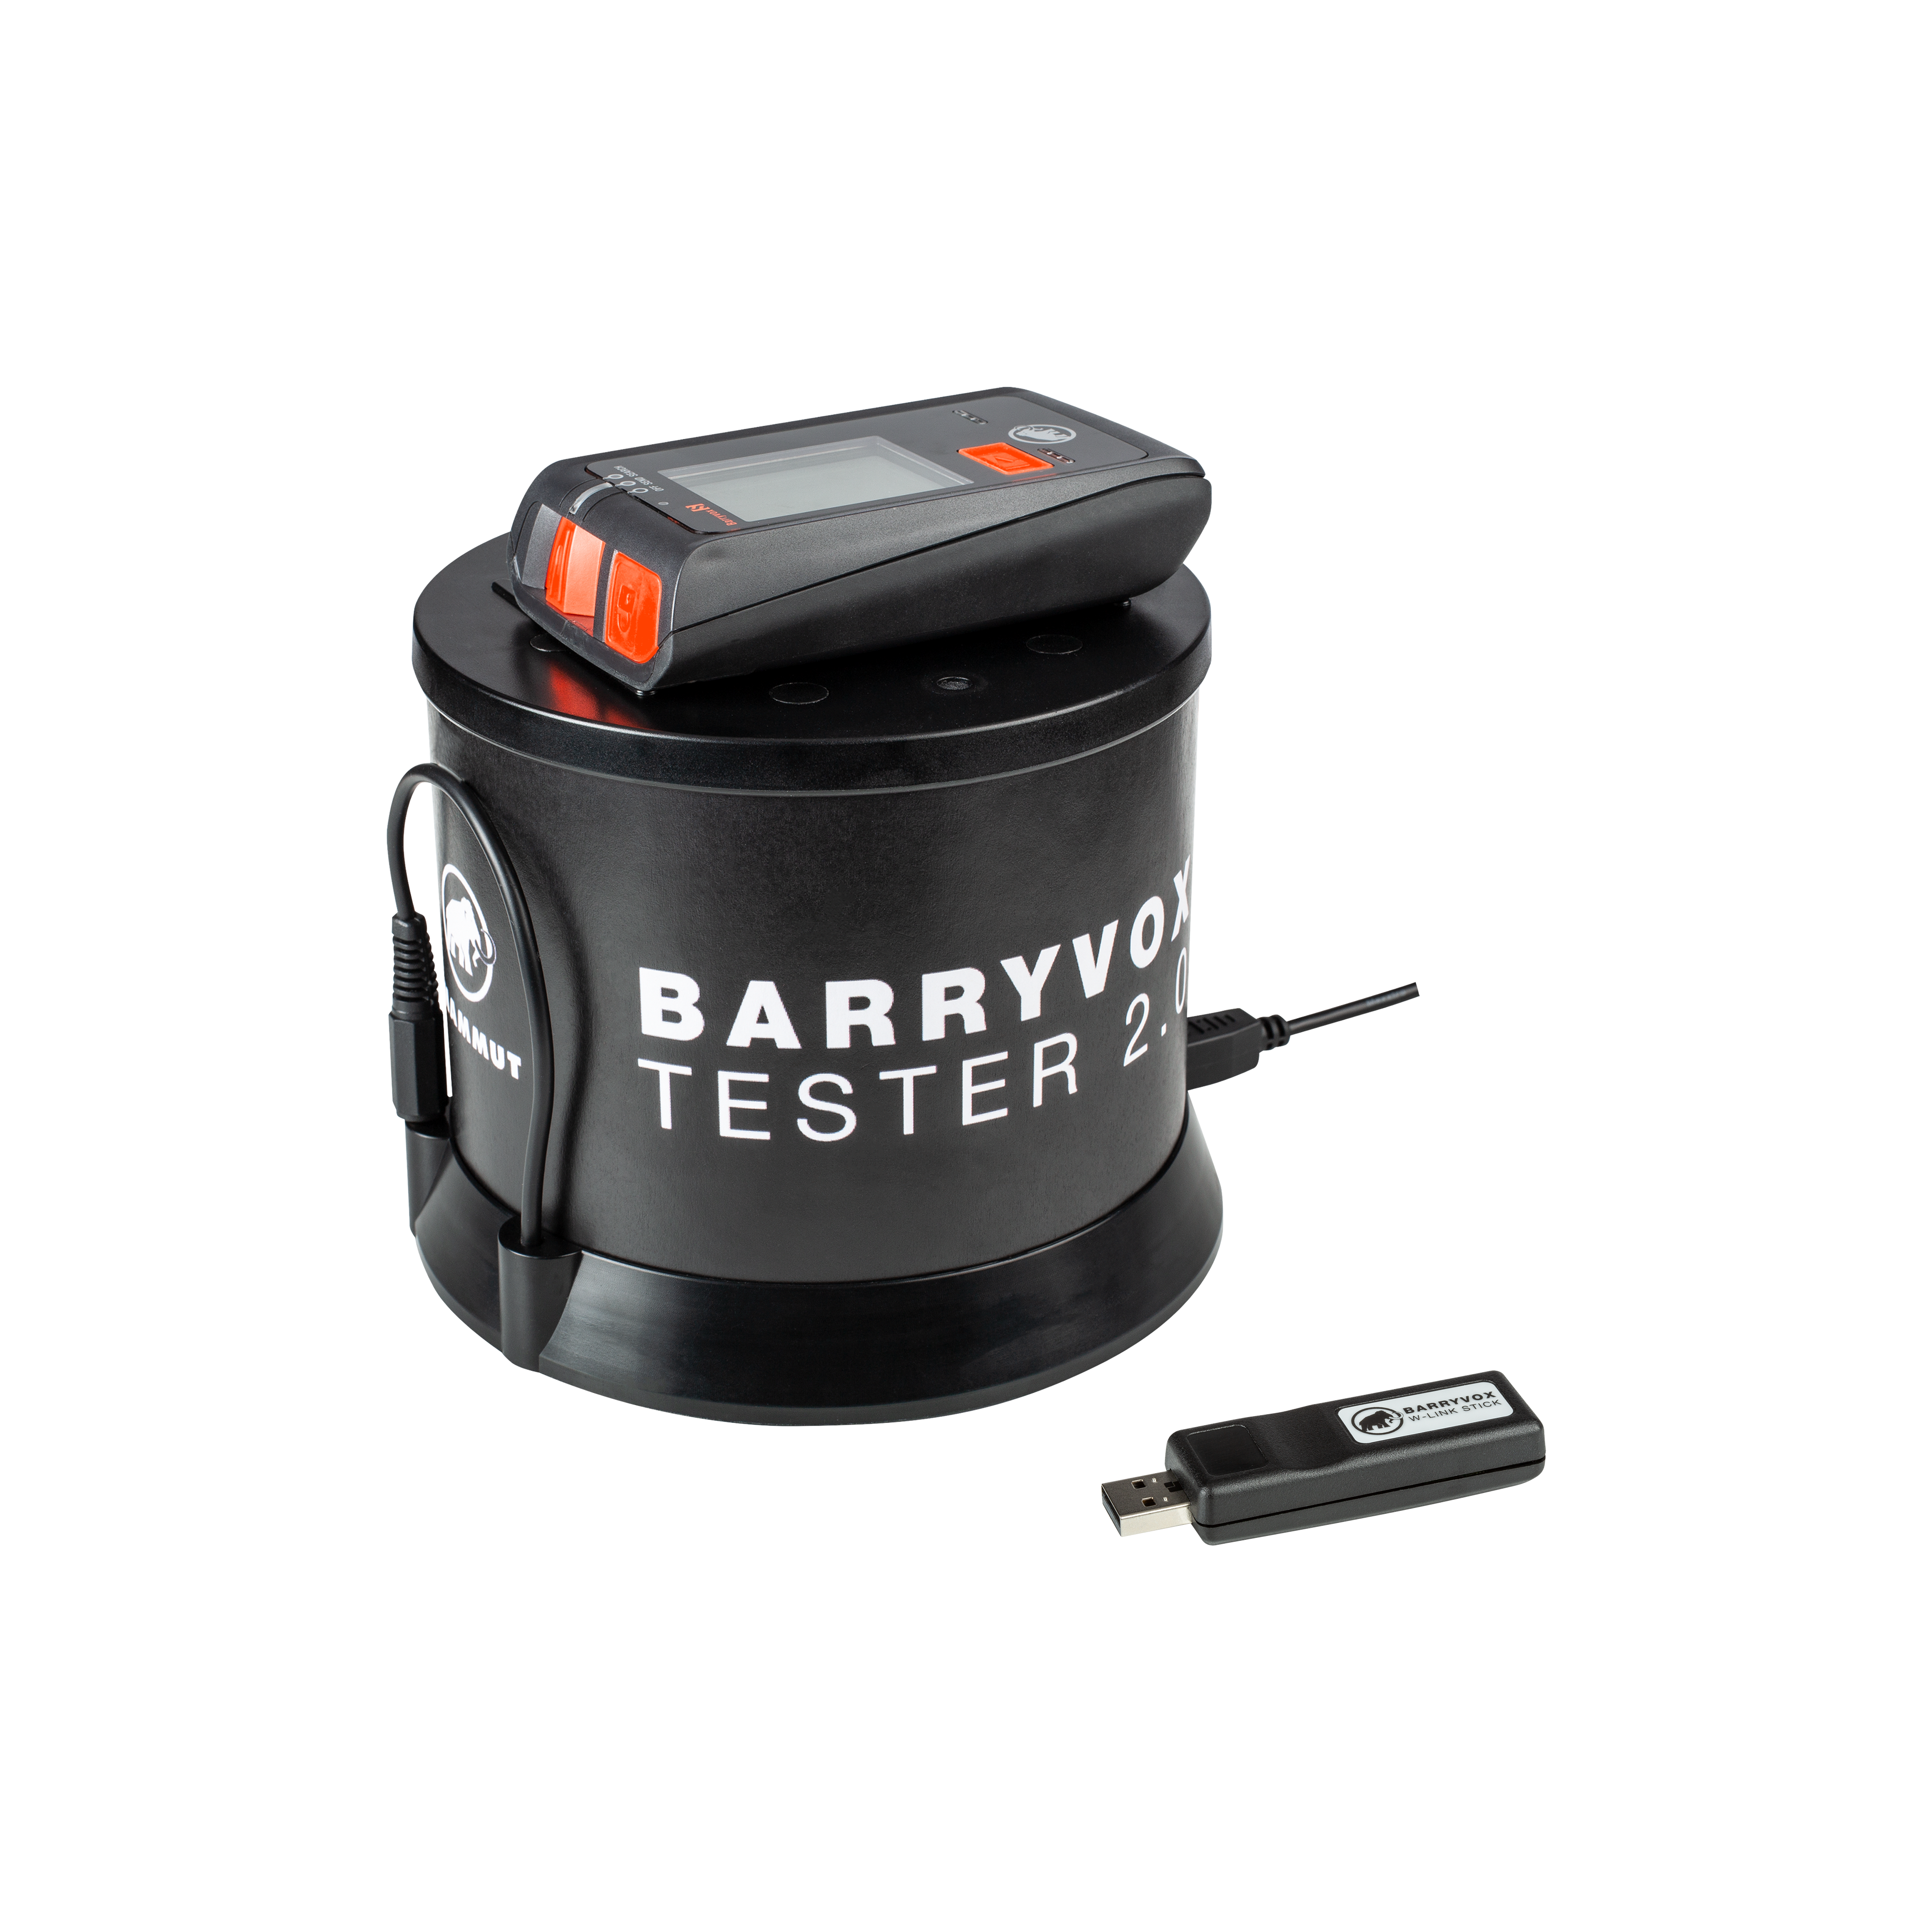 Barryvox Tester 2.0 Package with W-Link Stick